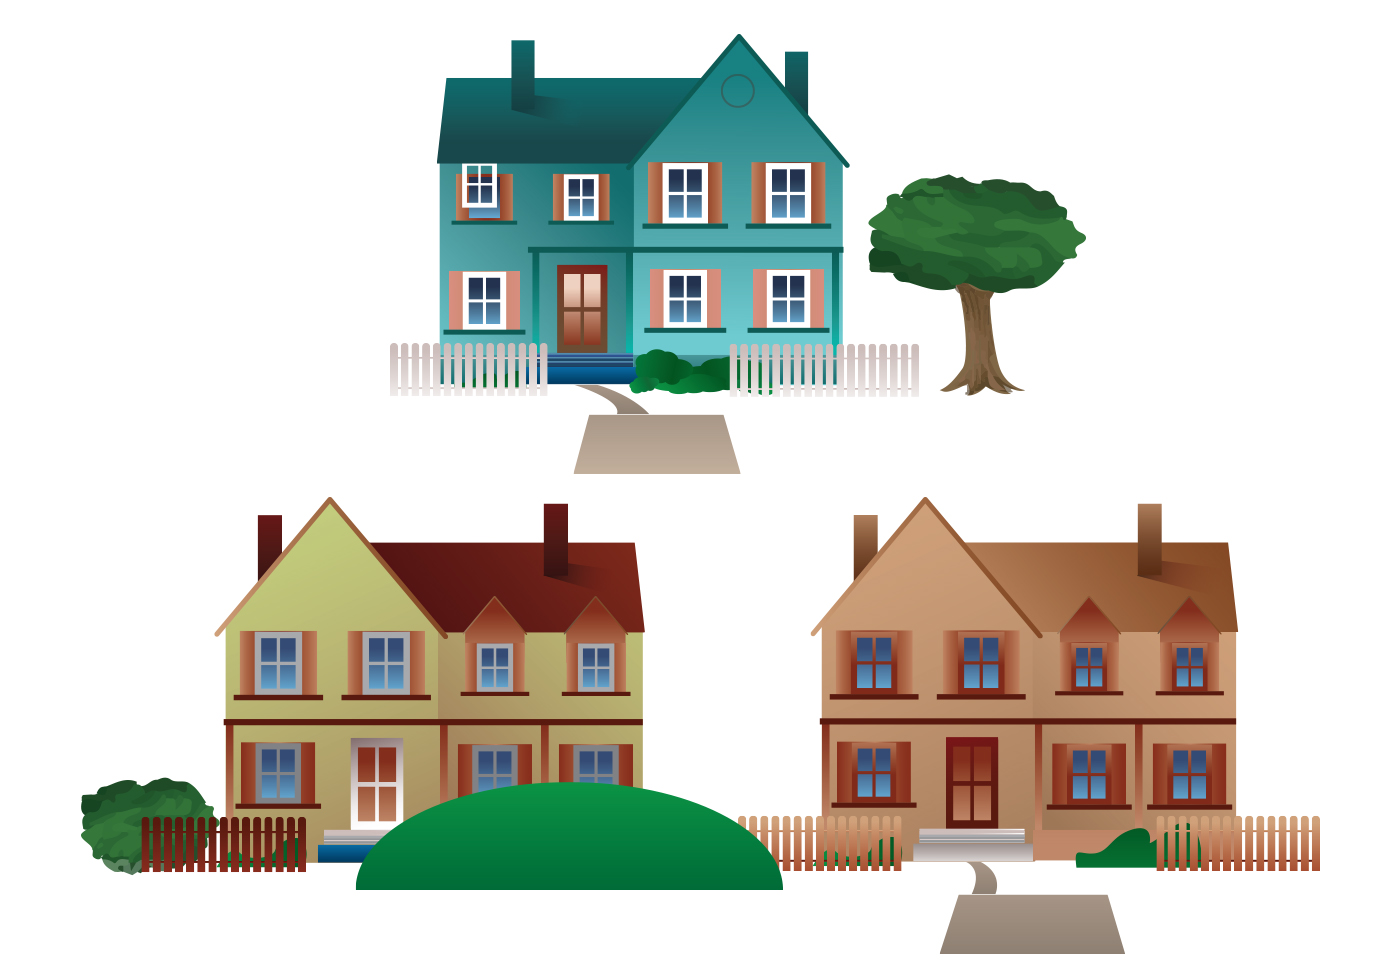 House Free Vector Art - (6576 Free Downloads)